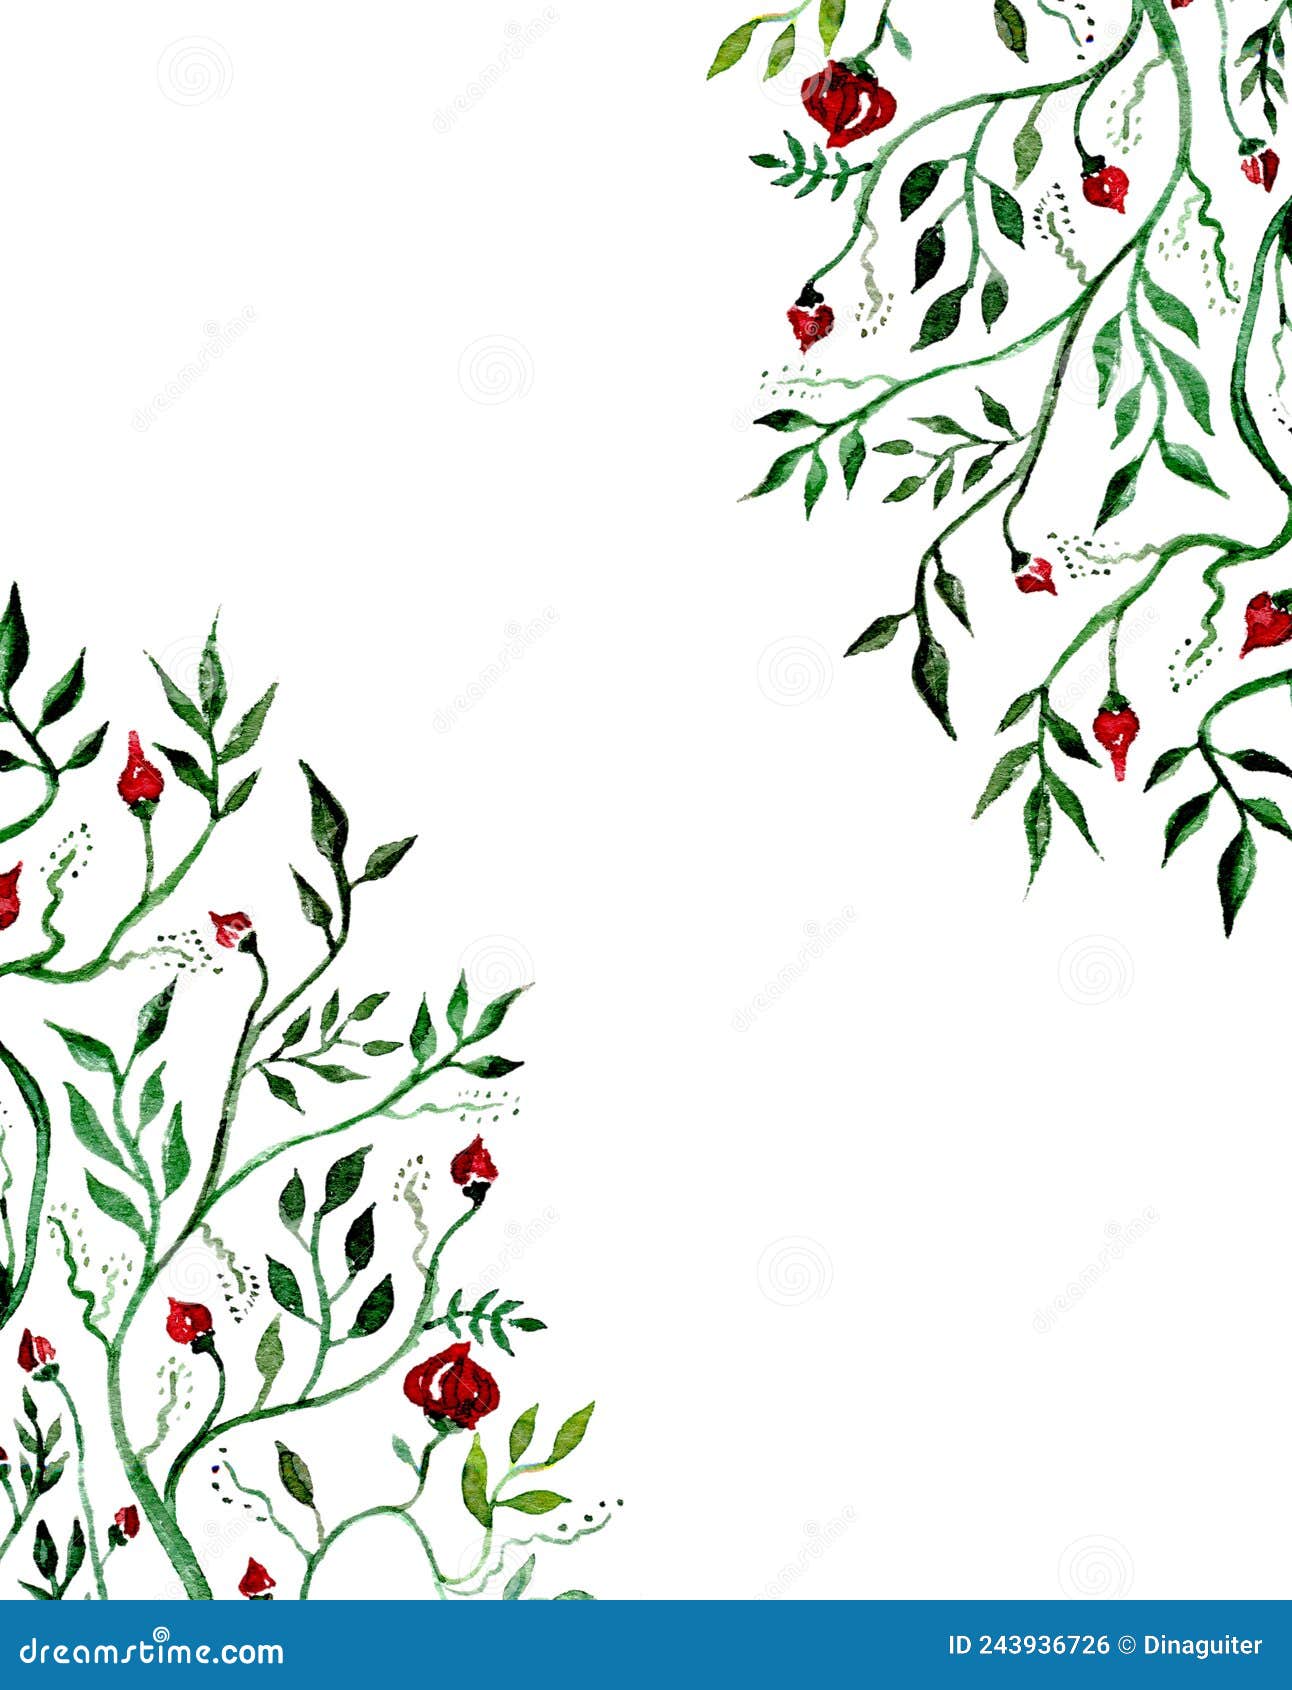 WINTER CHRISTMAS GREENERY CLIPART By DinaGuiter